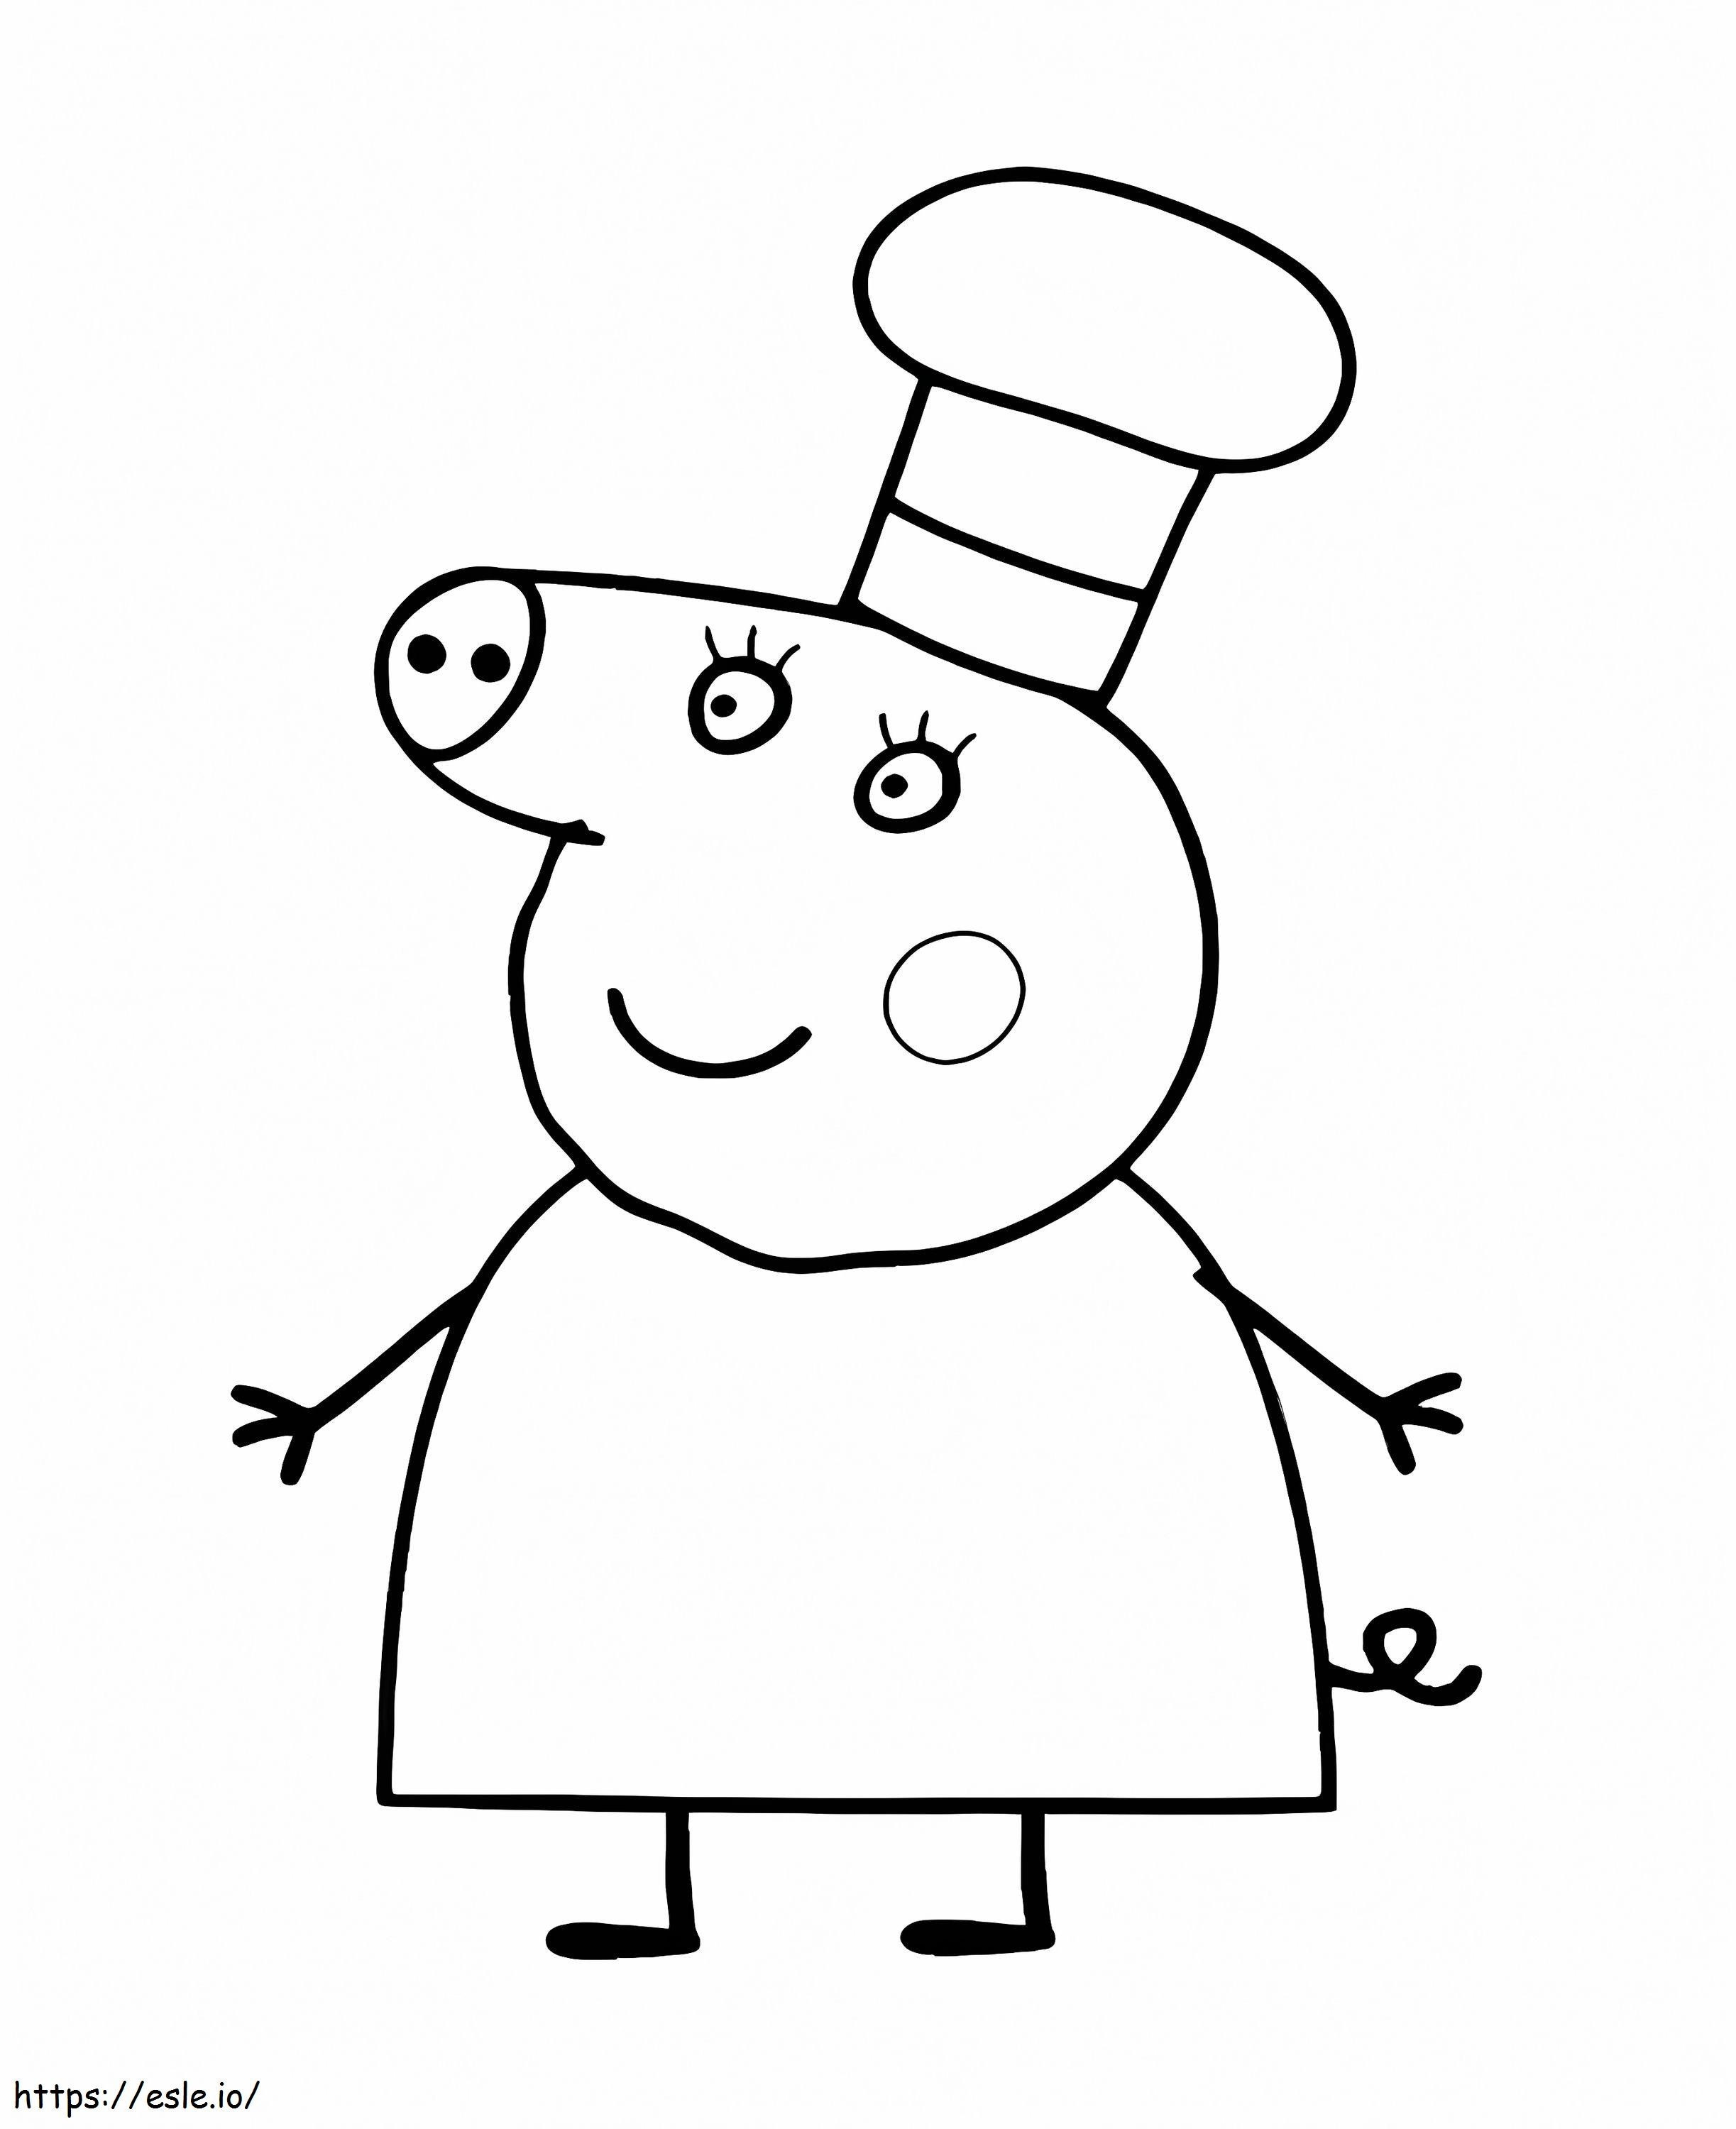 Cooking Mummy Pig coloring page